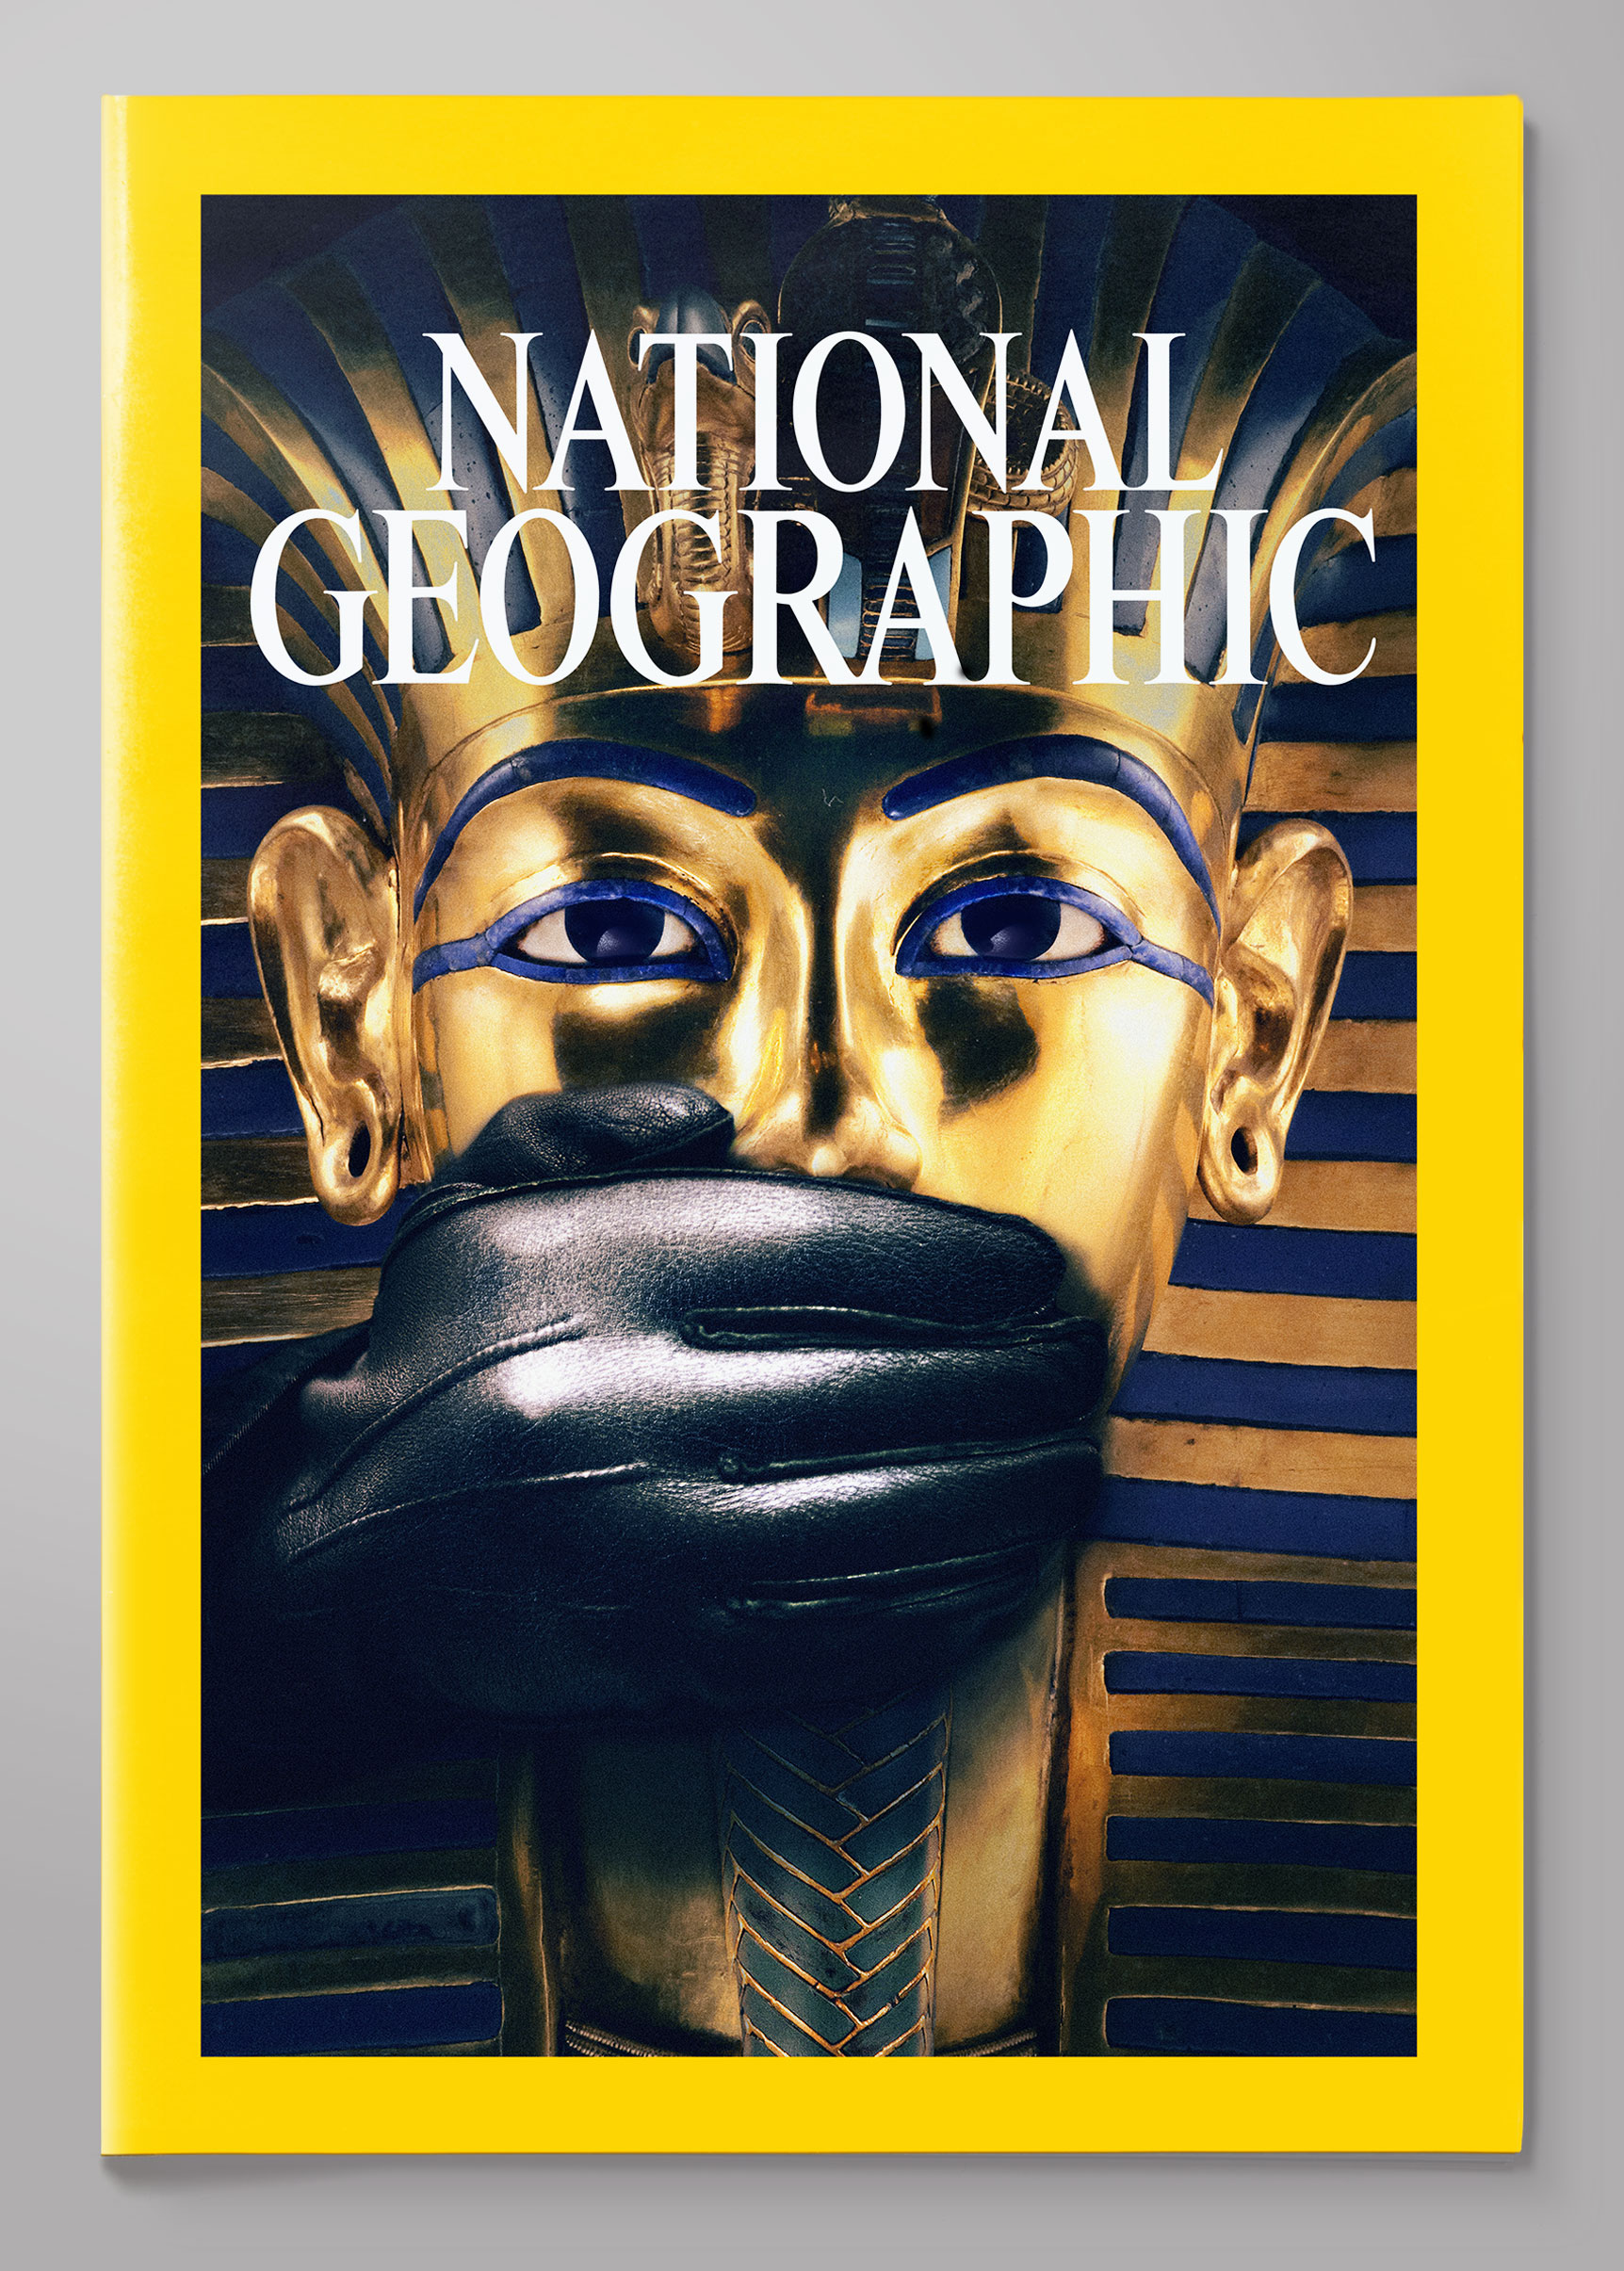 17/5/2016 National Geographic Magazine —Tombs Raider. Looting the 